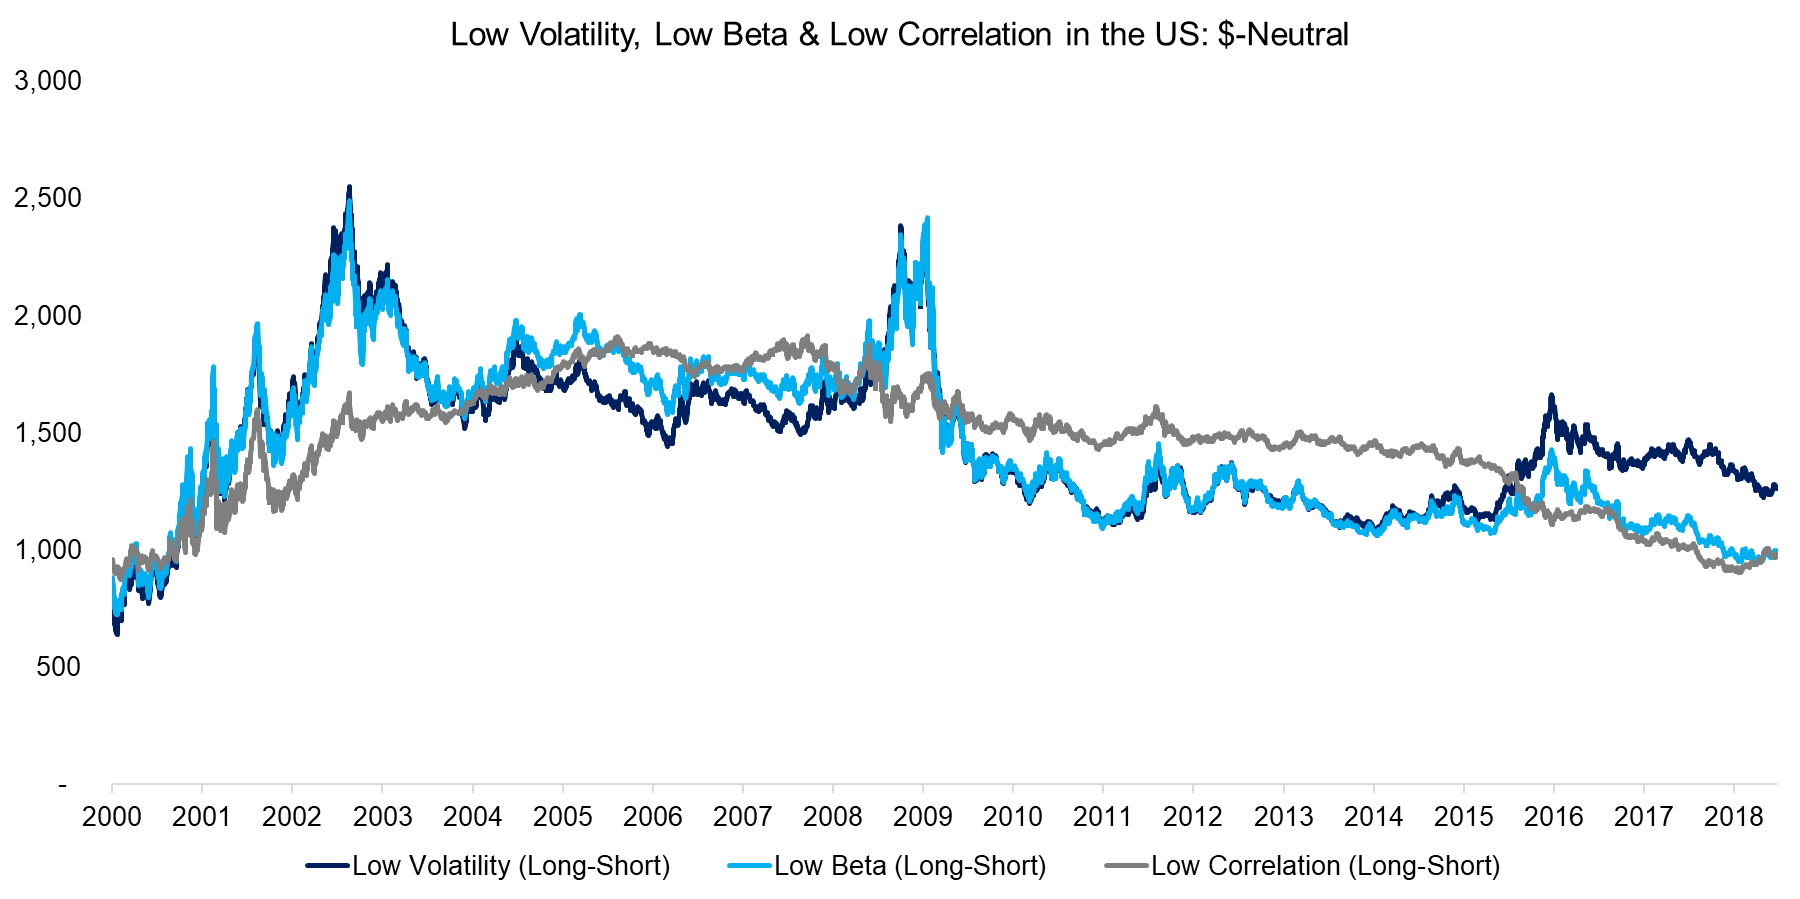 Low Volatility, Low Beta & Low Correlation in the US $-Neutral